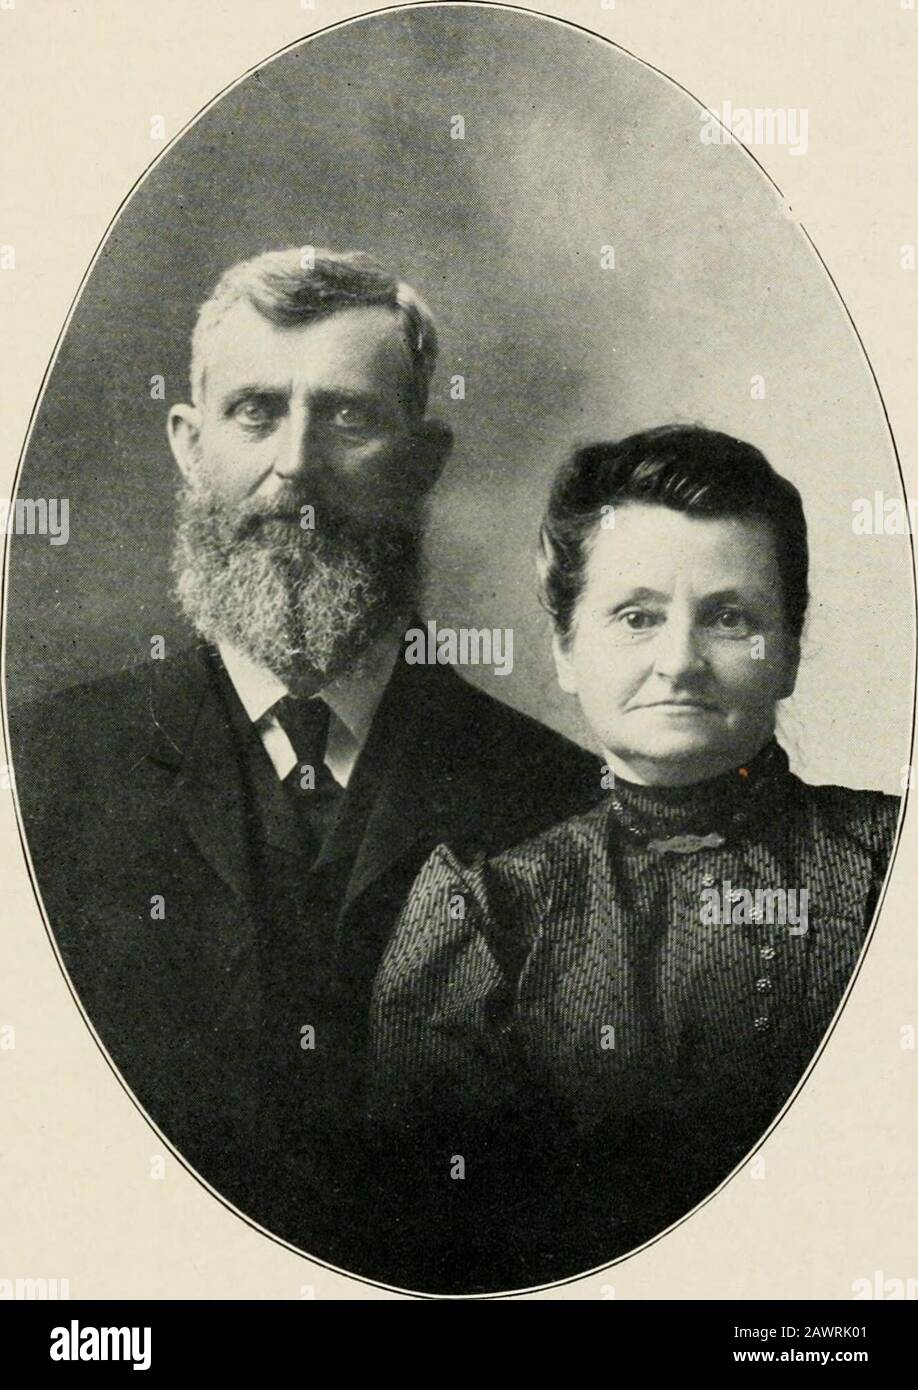 History of Daviess and Gentry counties, Missouri . of Benjamin S., and Rachel (Hines) Gould. Mr.Gould was born in Dutchess County, N. Y., and his wife was a native ofBradford County, Pa. Mr. Gould died in 1875 in Illinois and his wife diedin 1916 in Kansas. Richard Hudson and his wife lived for 16 years in Lincoln County,Kans., where he carried on farming and stock raising. In 1894 he remov-ed to Daviess County, and settled in Colfax Township, where he lived untilhis death in May, 1916. He owned 200 acres of well improved land twomiles south of Winston, and since his death, his wife and sons h Stock Photo